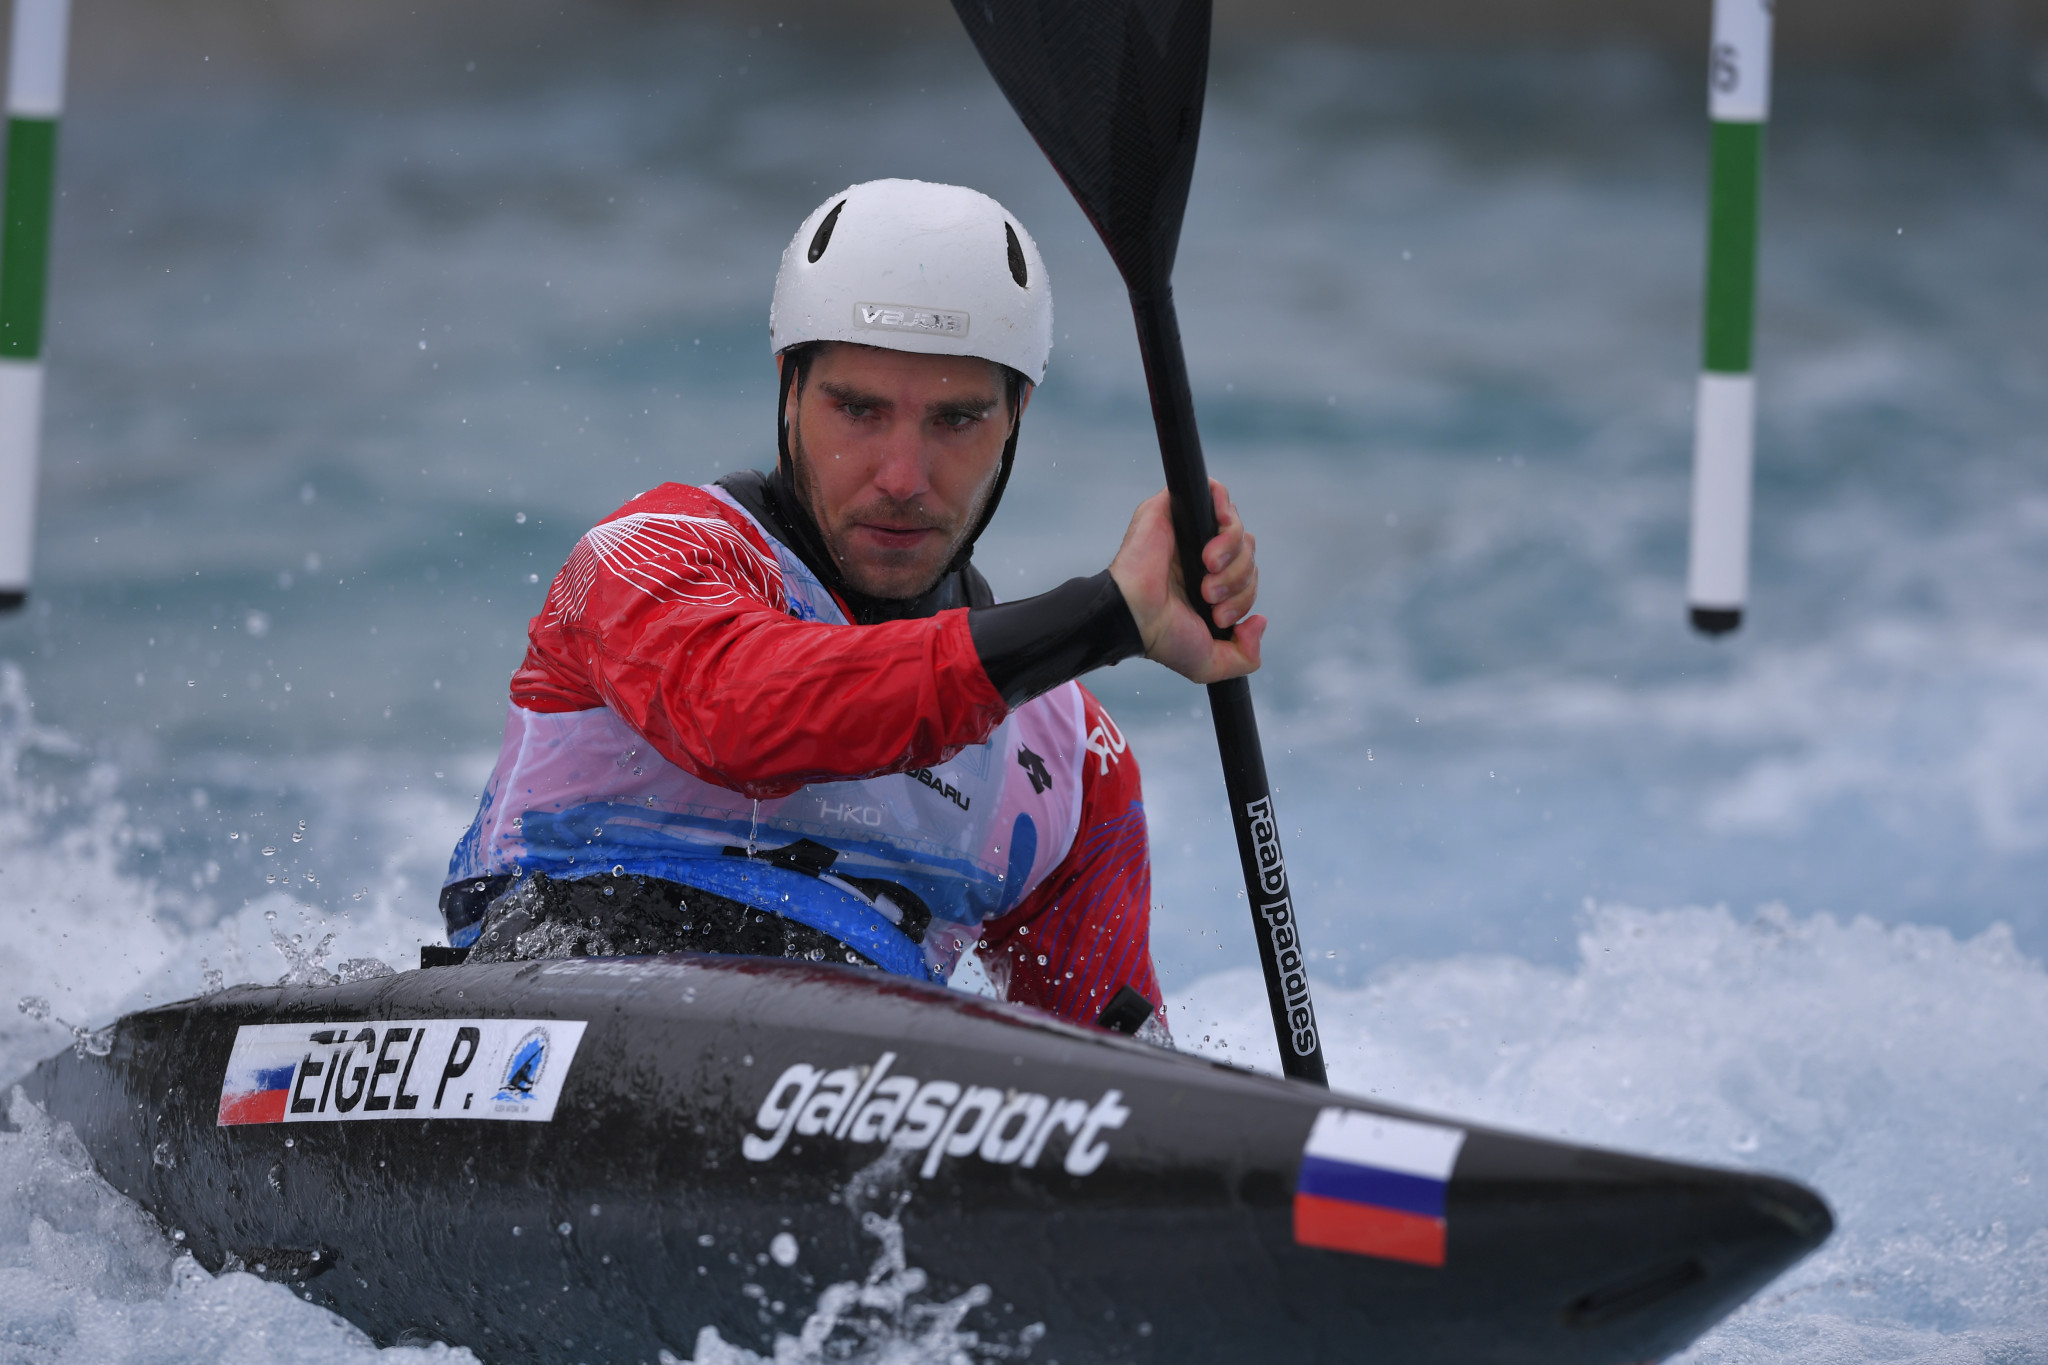 Pavel Eigel was the fastest qualifier in the men's K1 ©Getty Images